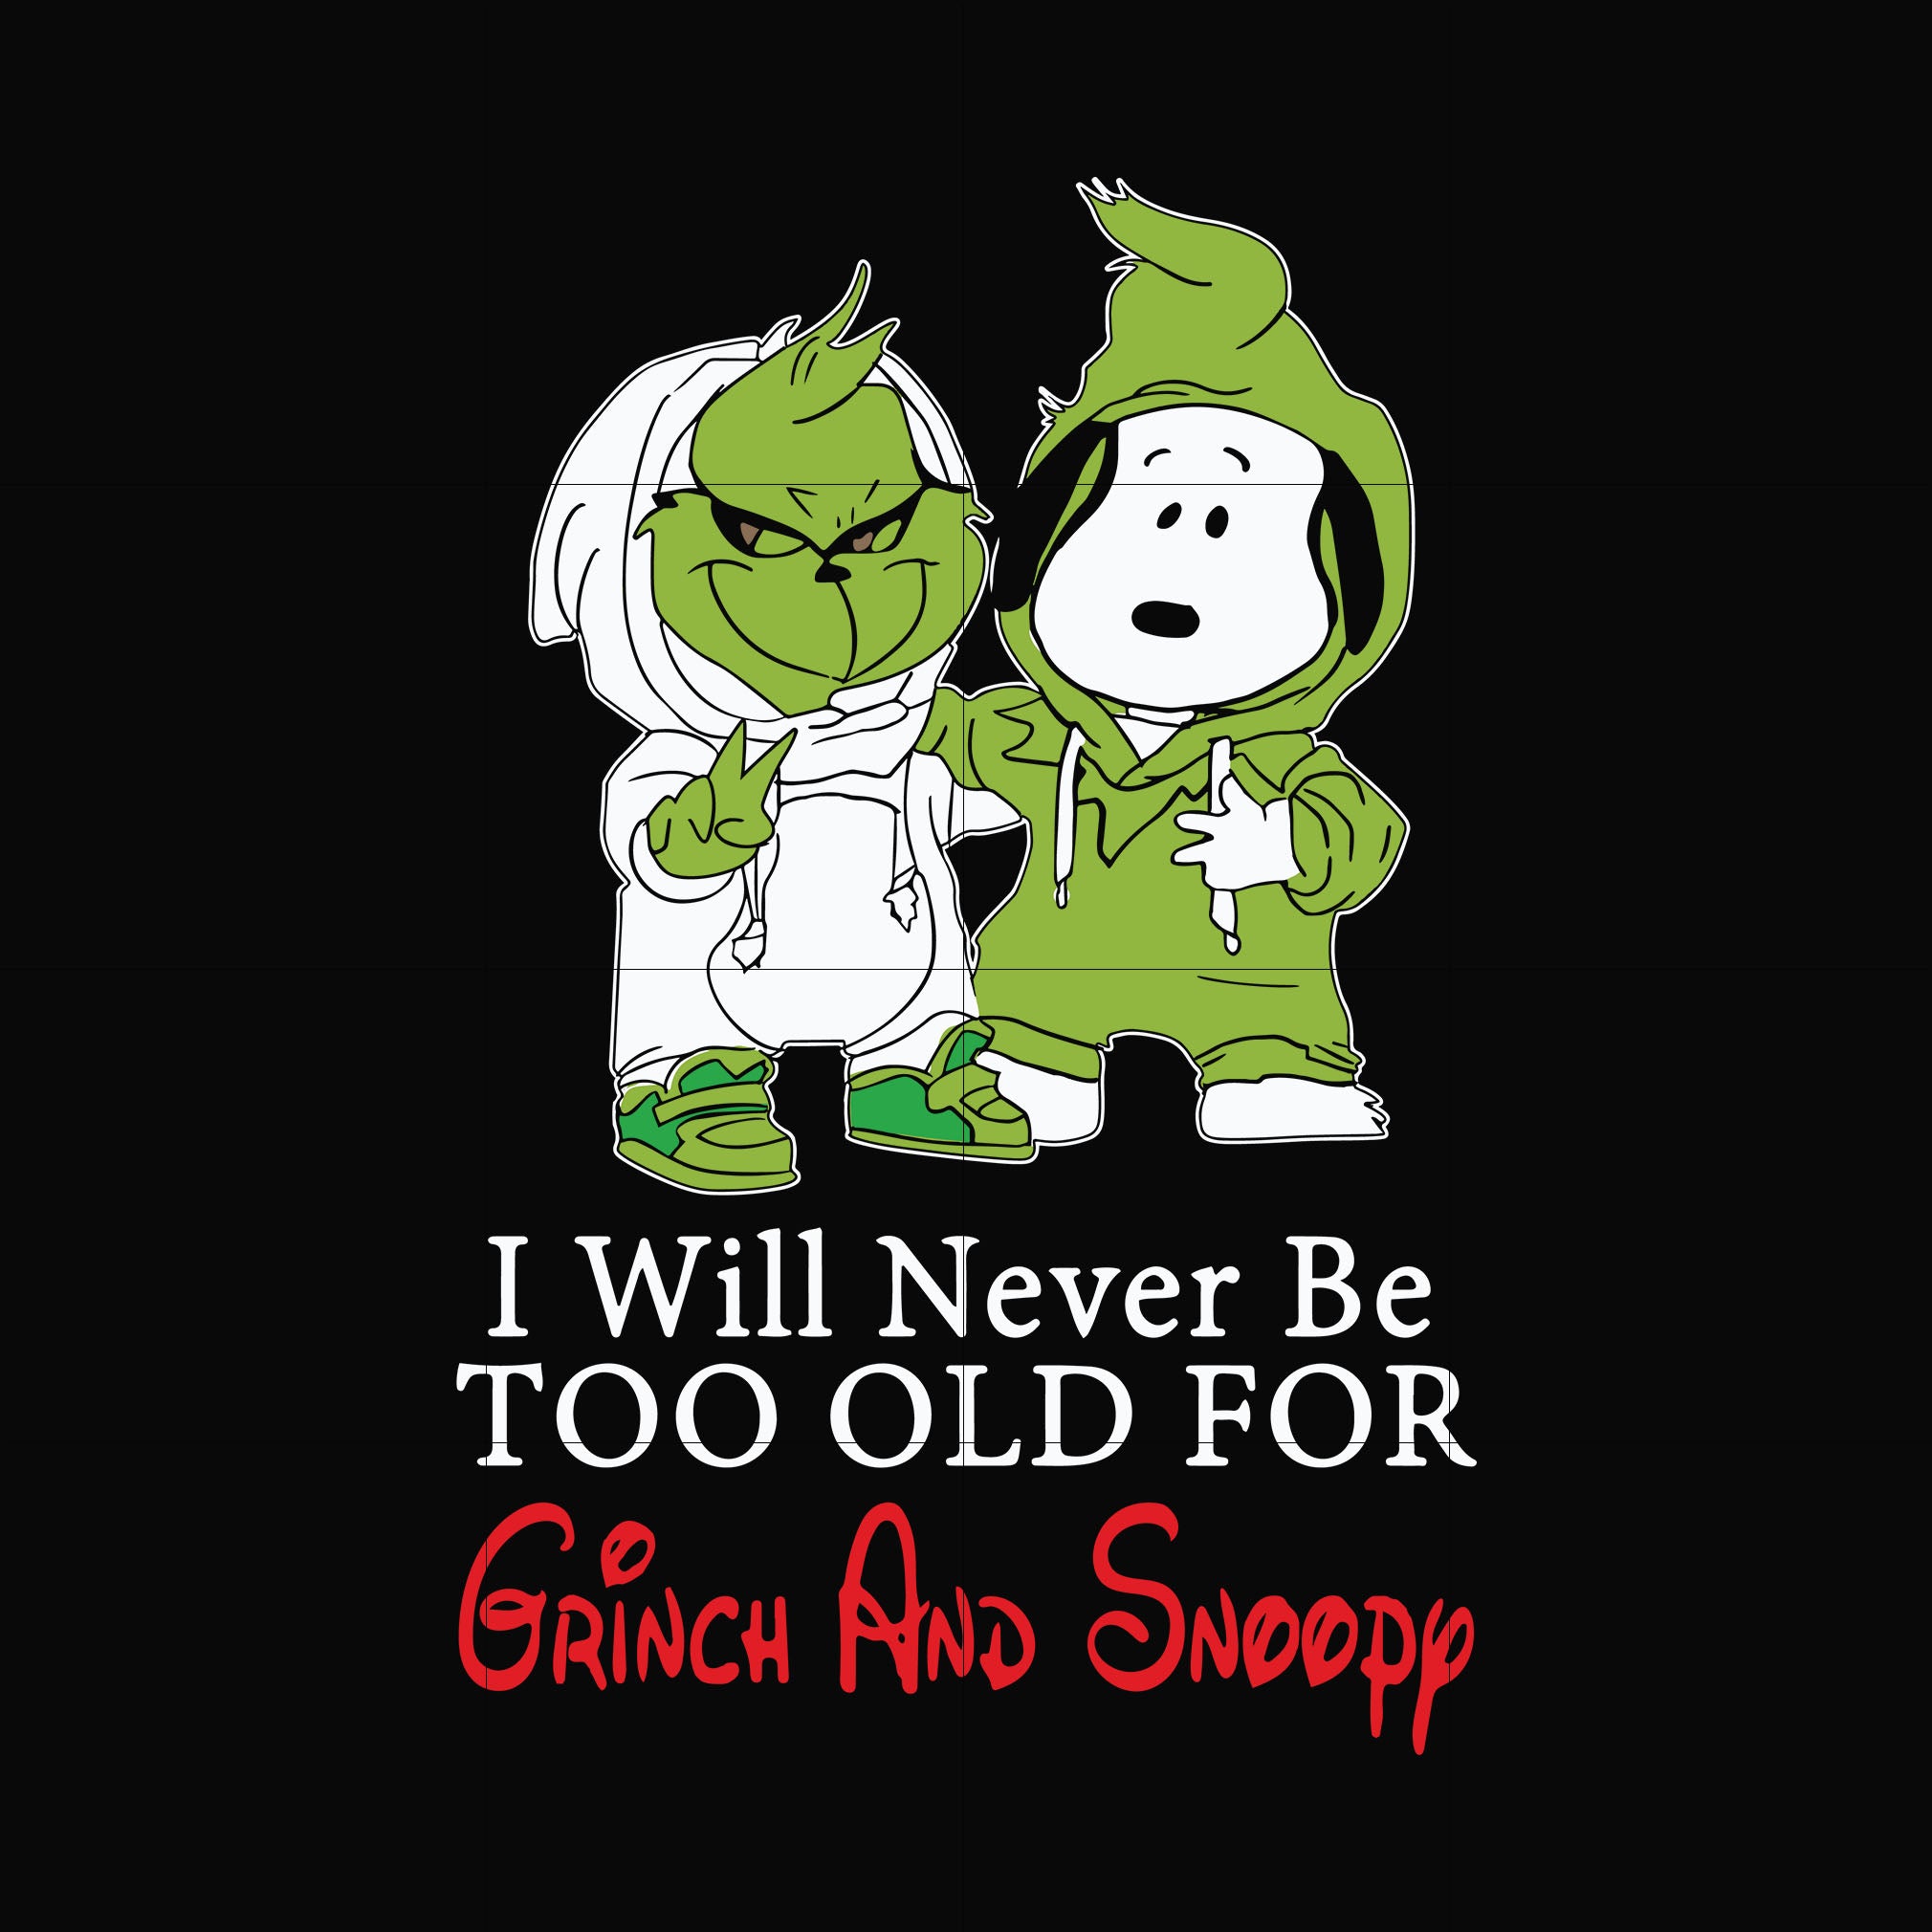 I will never be too old for grinch and snoopy svg, png, dxf, eps digital file NCRM13072019